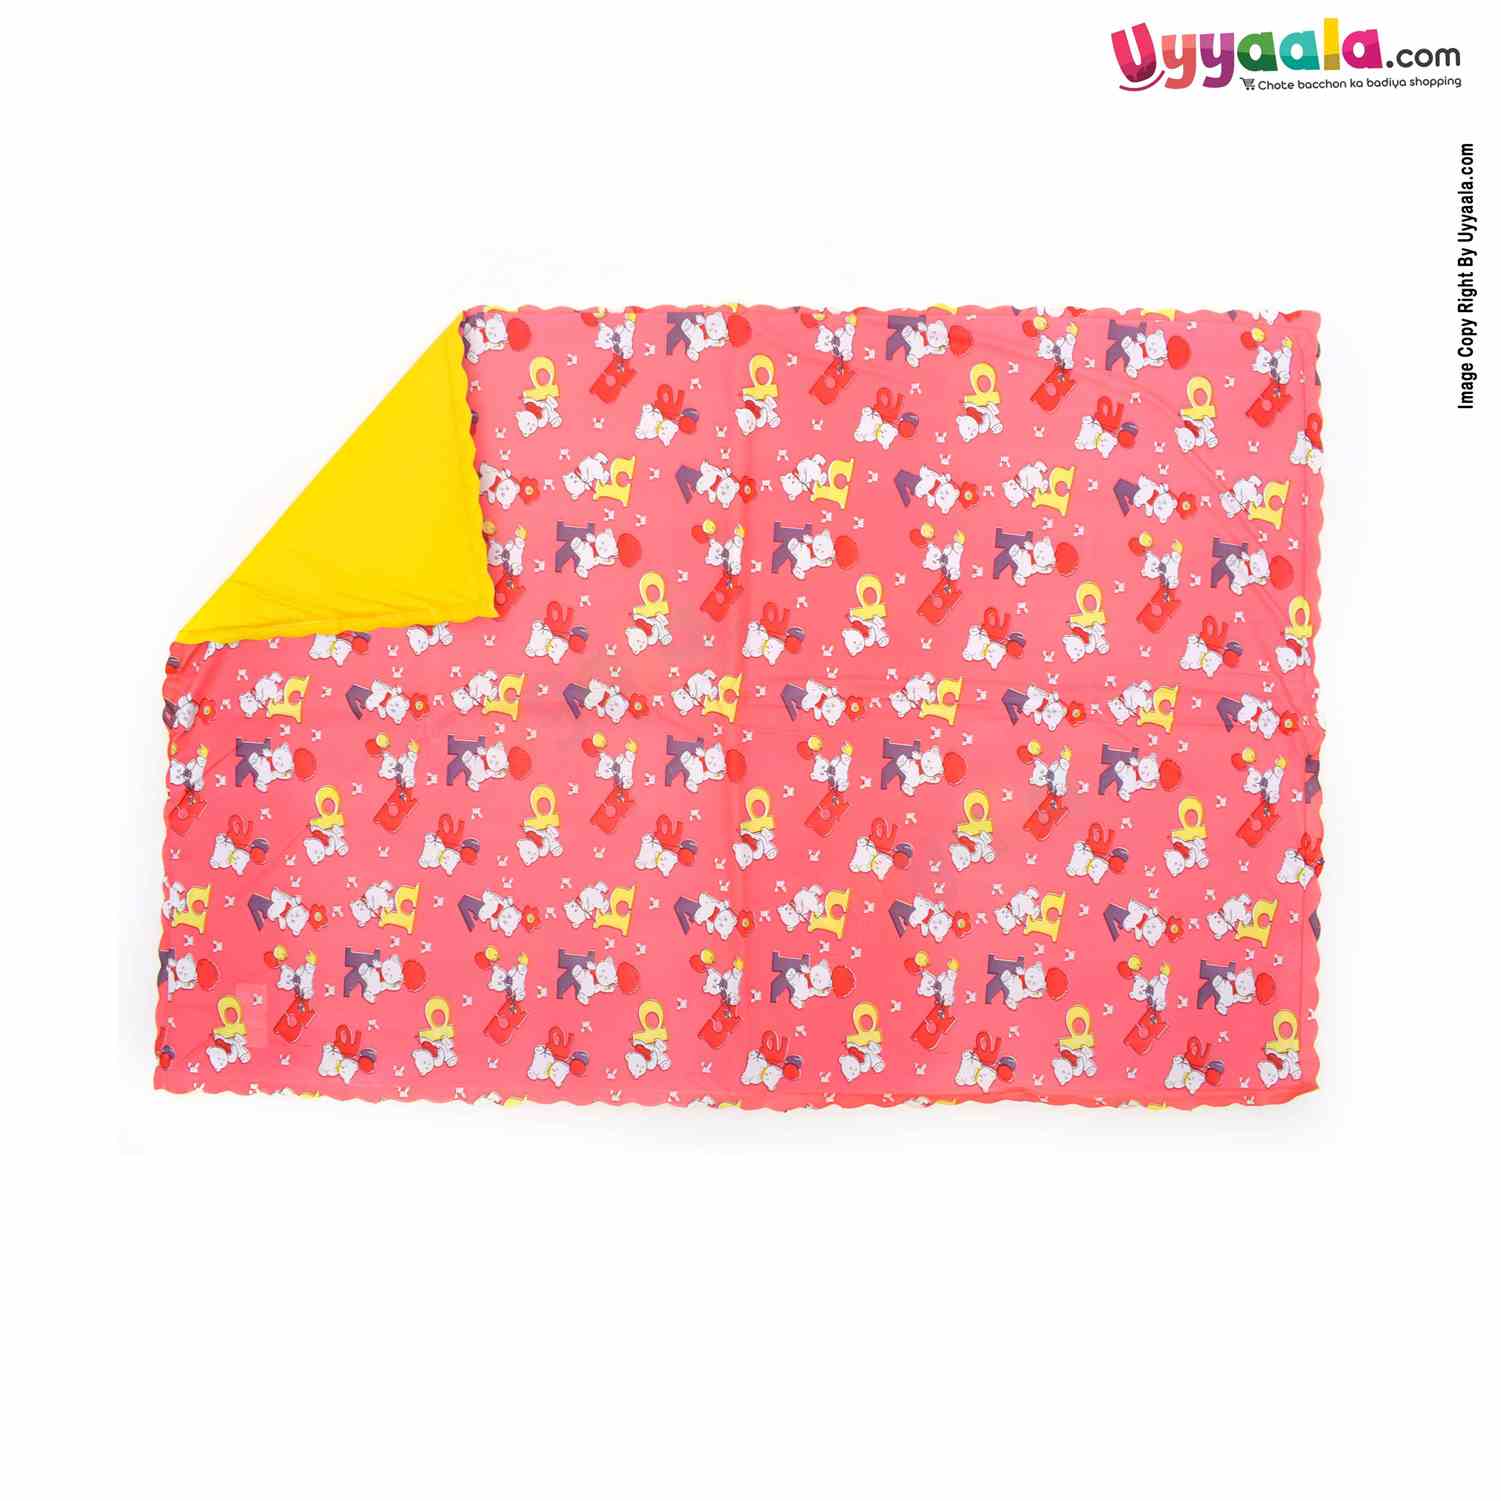 Plastic Sleeping mats Water Proof bed Protector with Foam Cushioned for Babies with Alphabets & Teddy Bear Print Medium